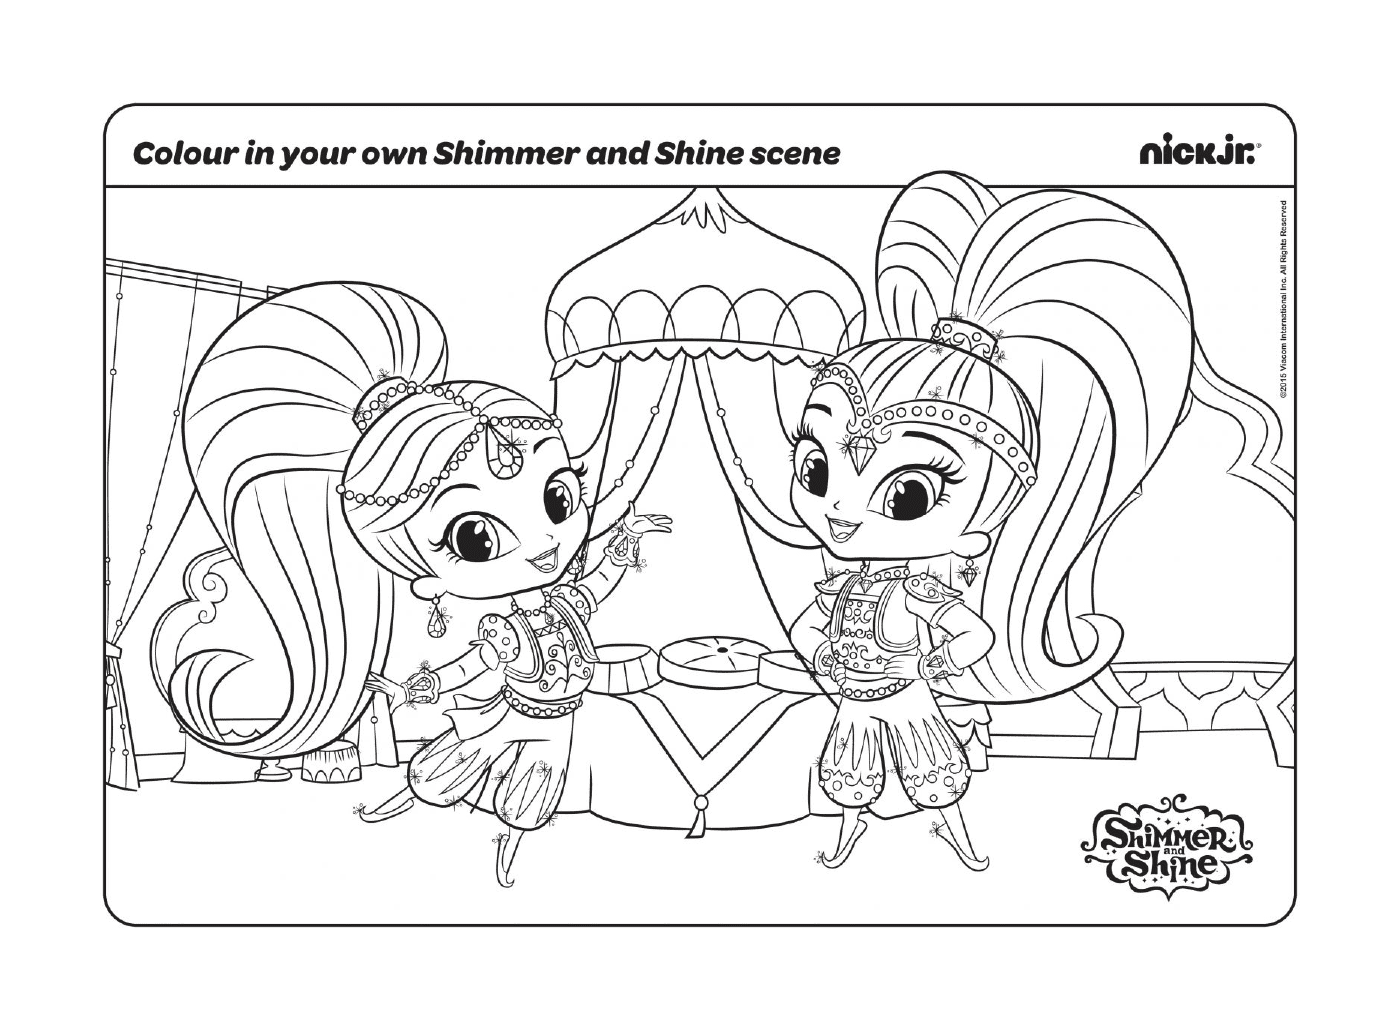 shimmer et shine Fun with Colouring Page